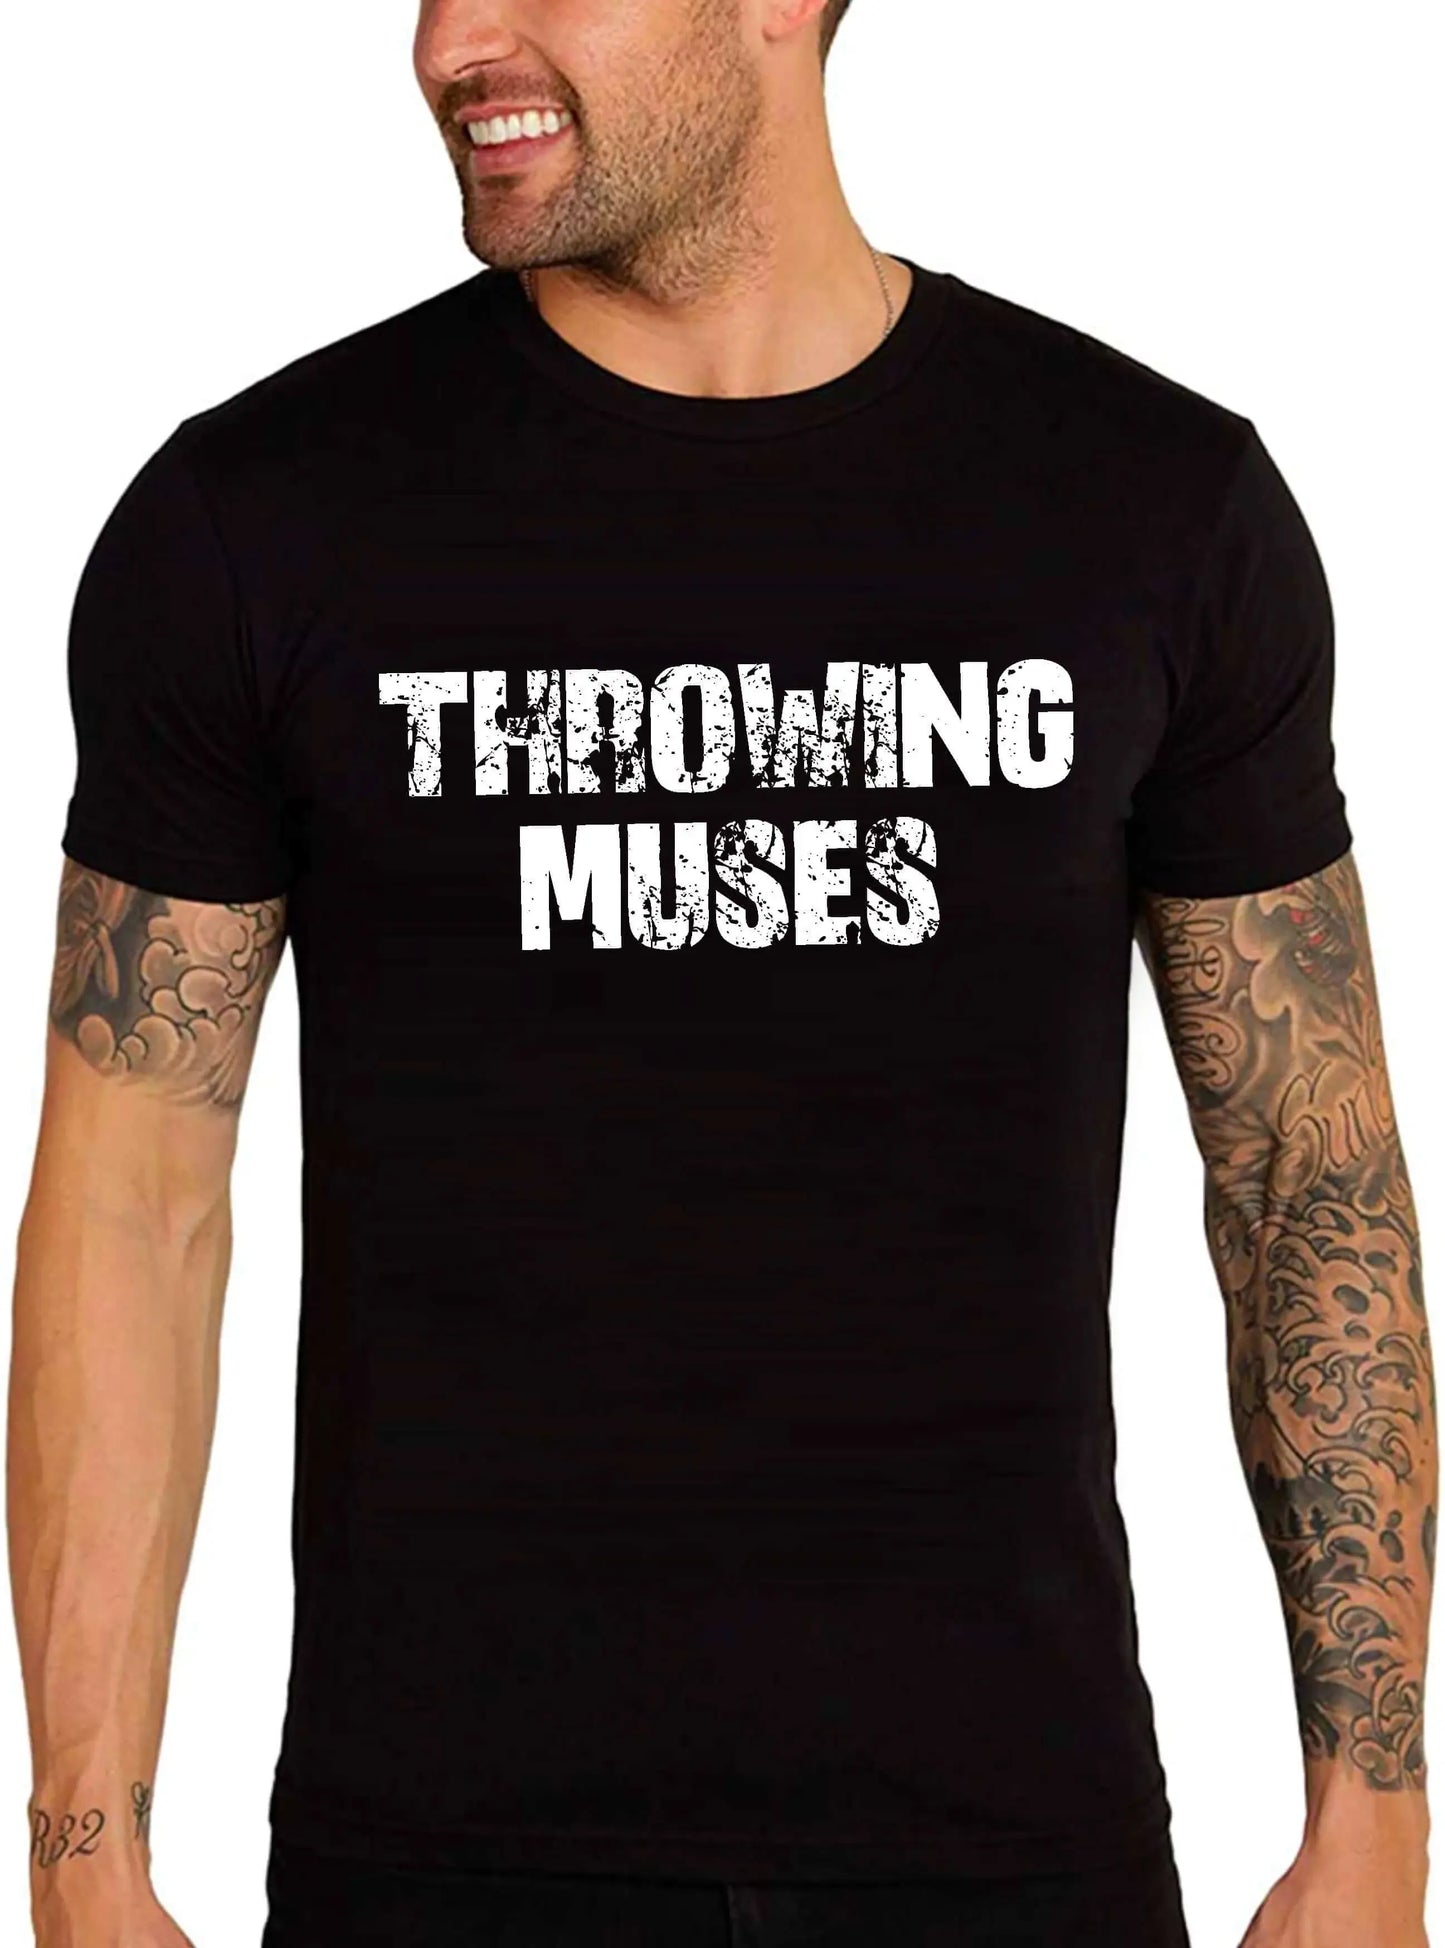 Men's Graphic T-Shirt Throwing Muses Eco-Friendly Limited Edition Short Sleeve Tee-Shirt Vintage Birthday Gift Novelty